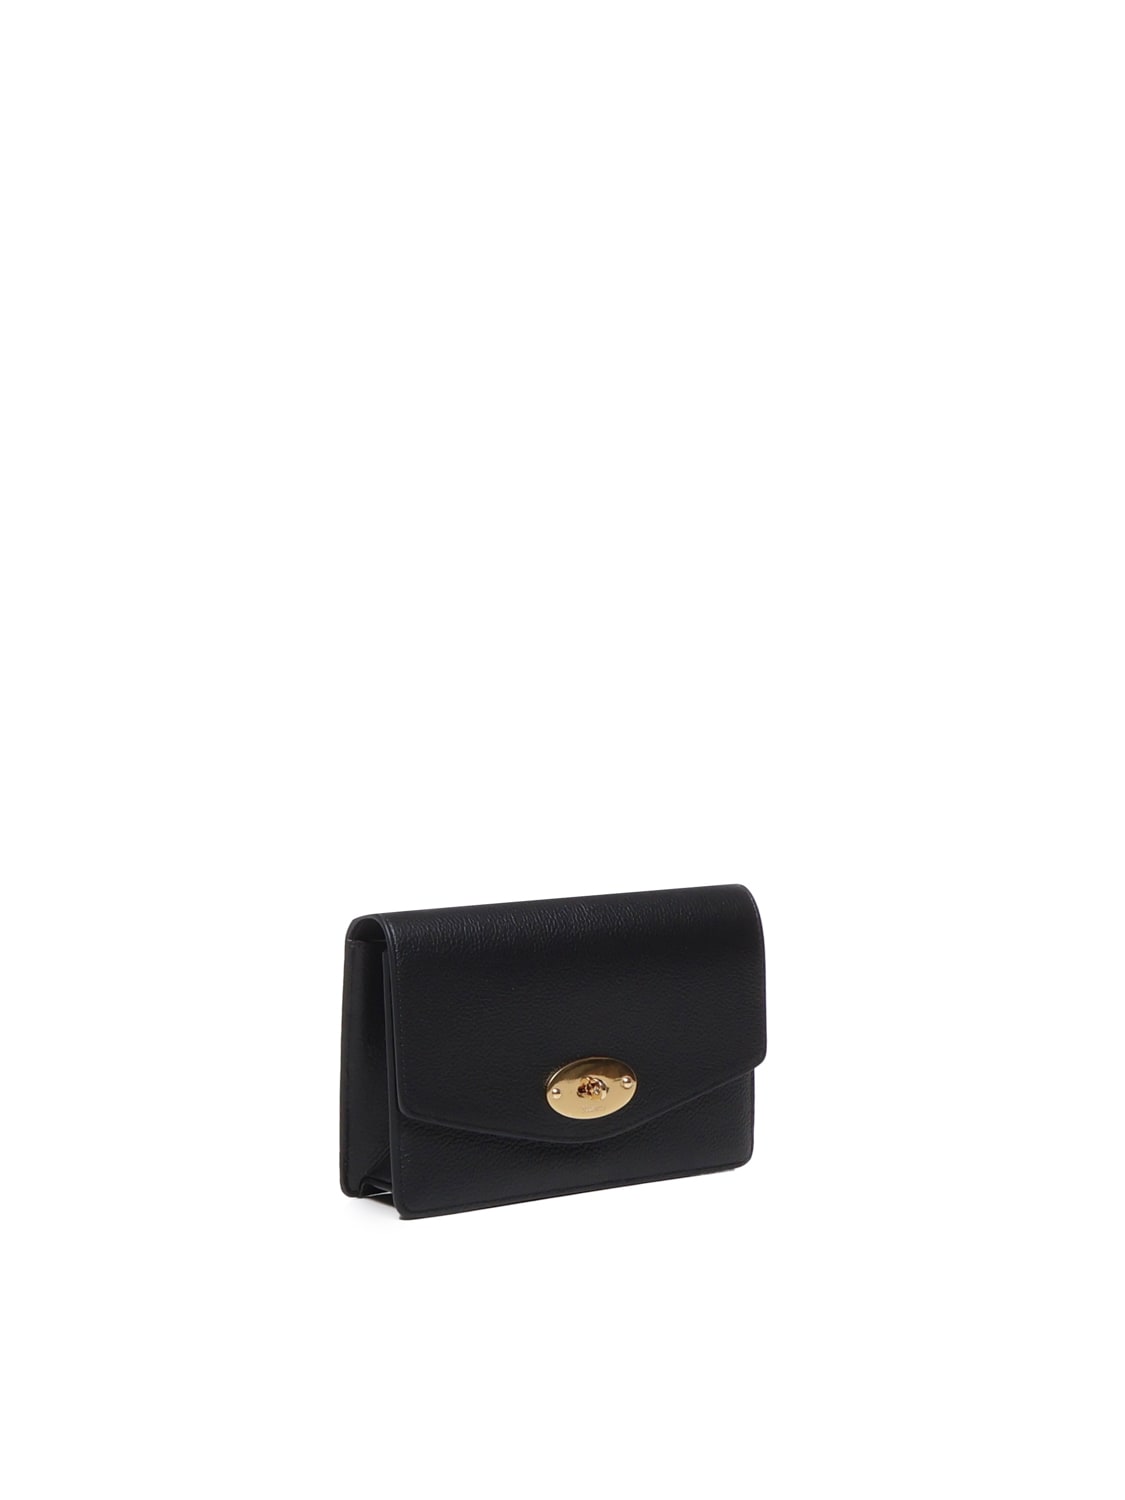 Shop Mulberry Small Darley Leather Bag In Black